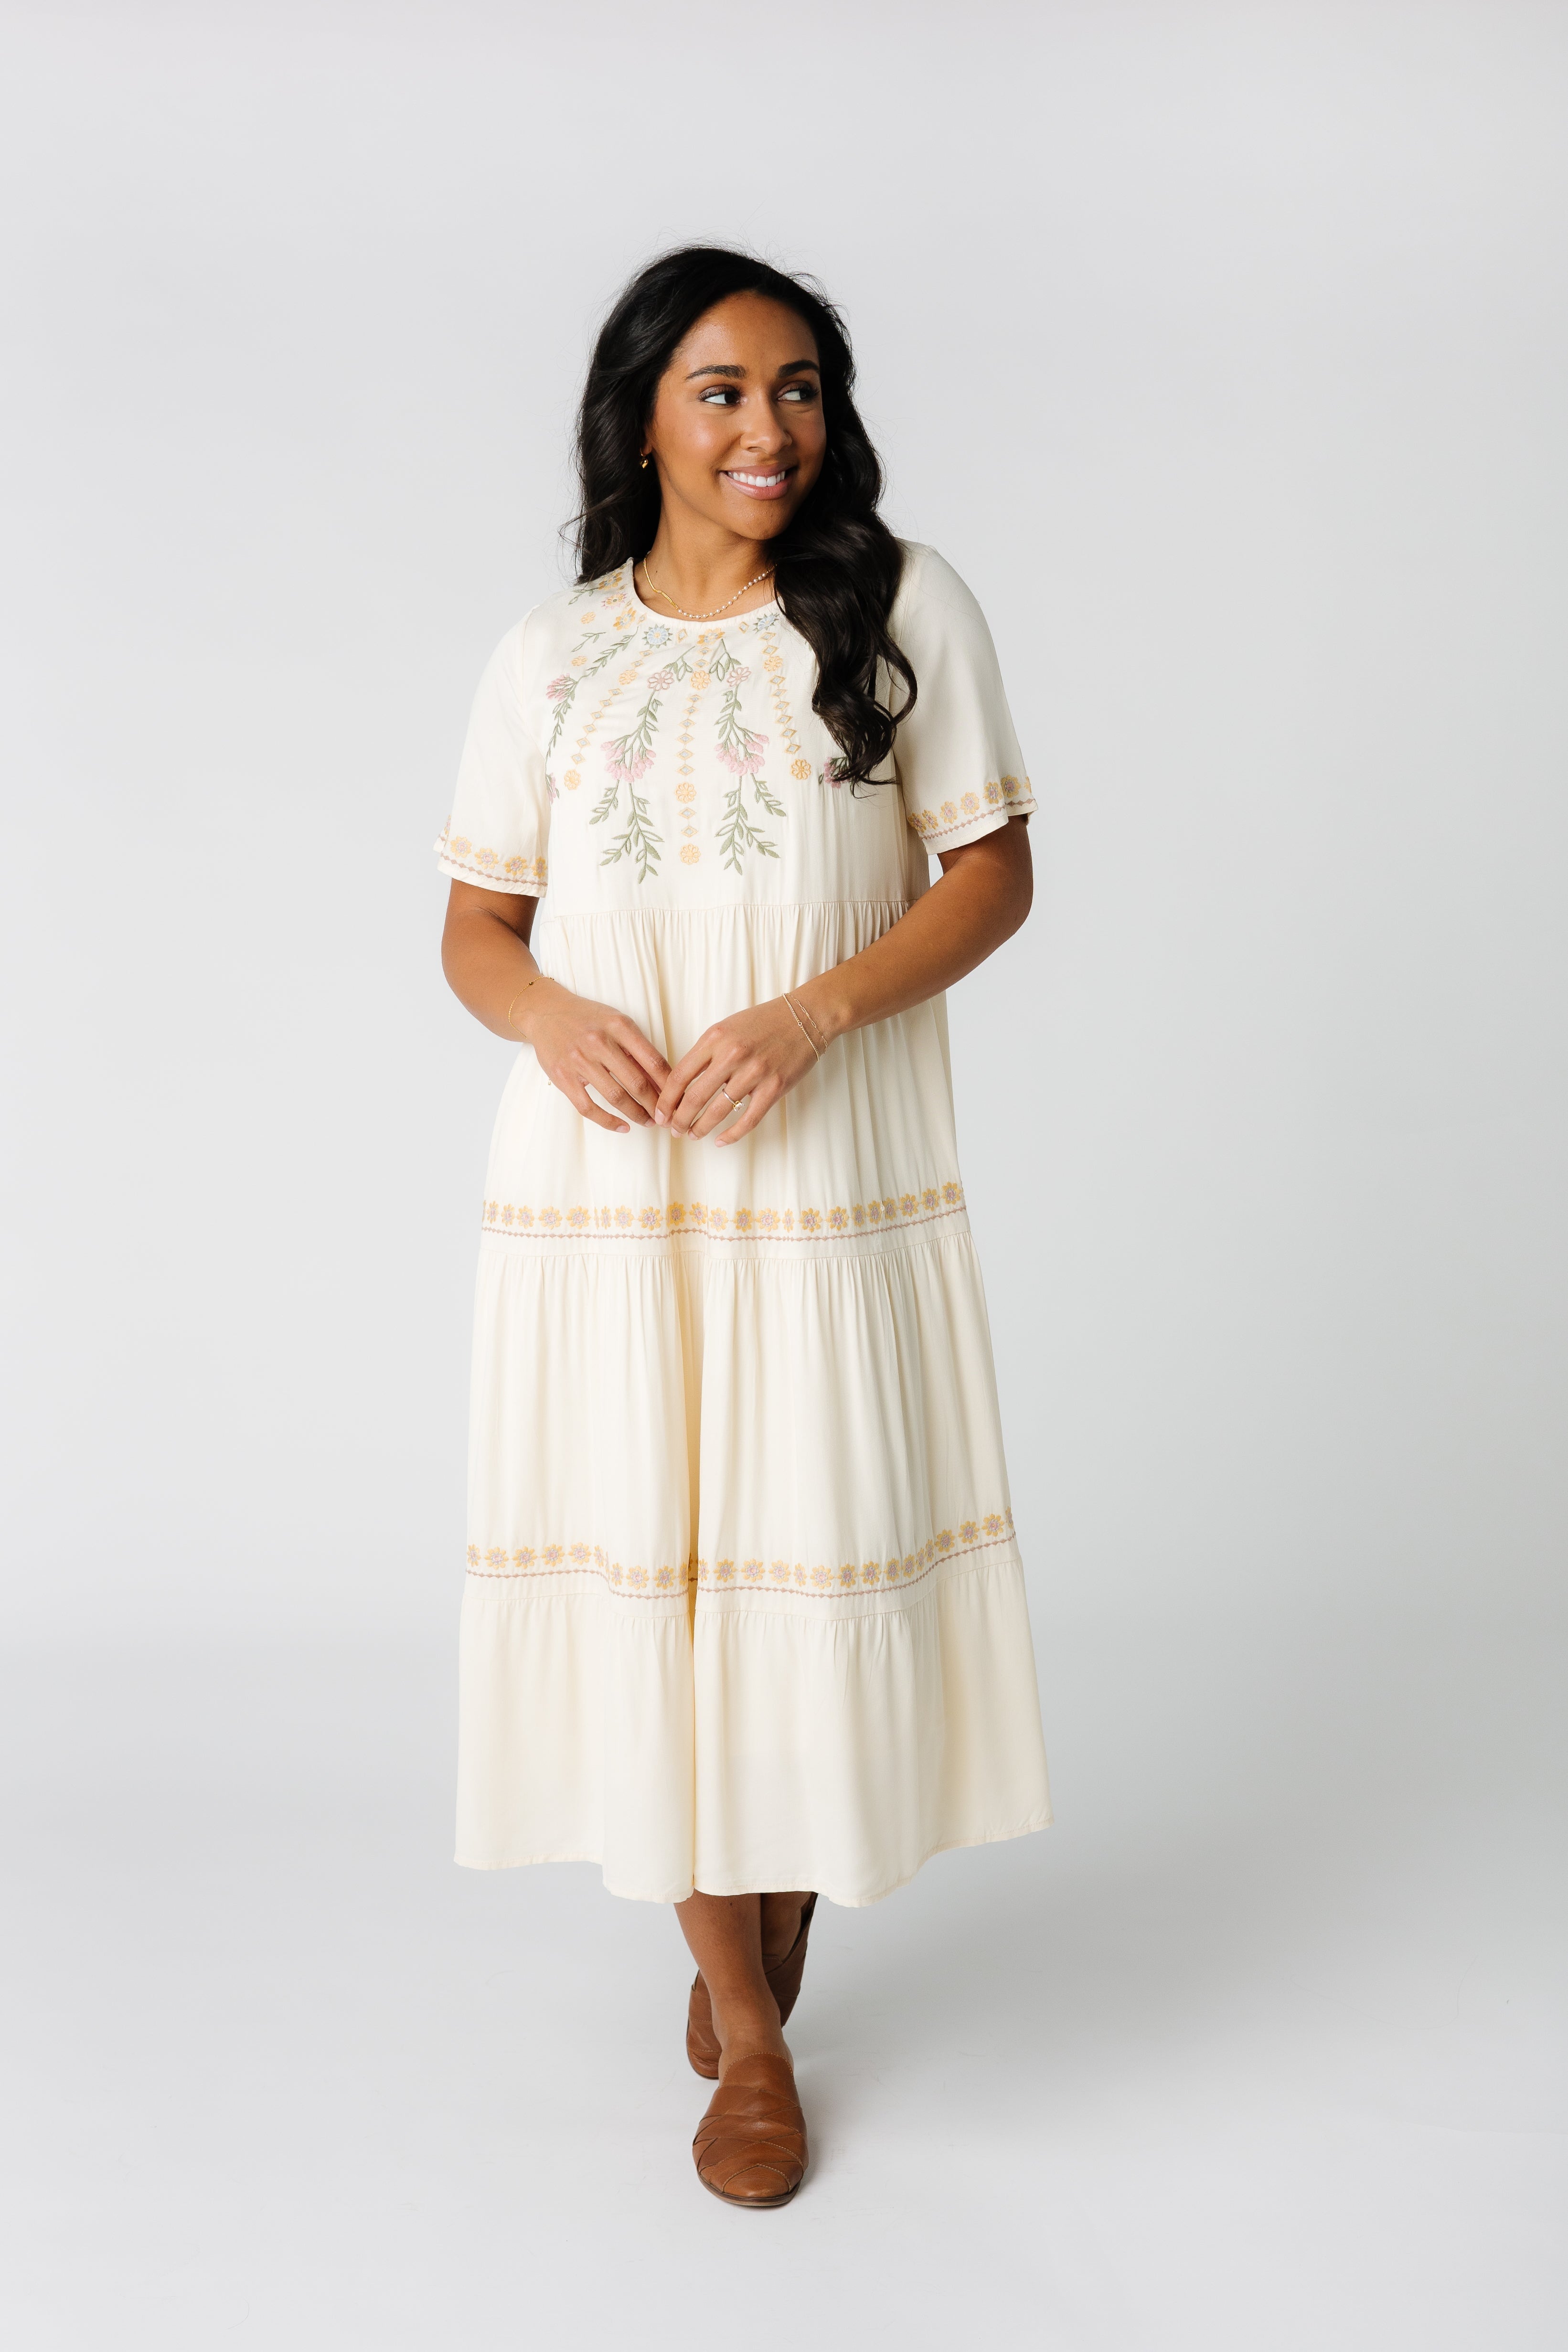 Mexican embroidered dress – Dandelie